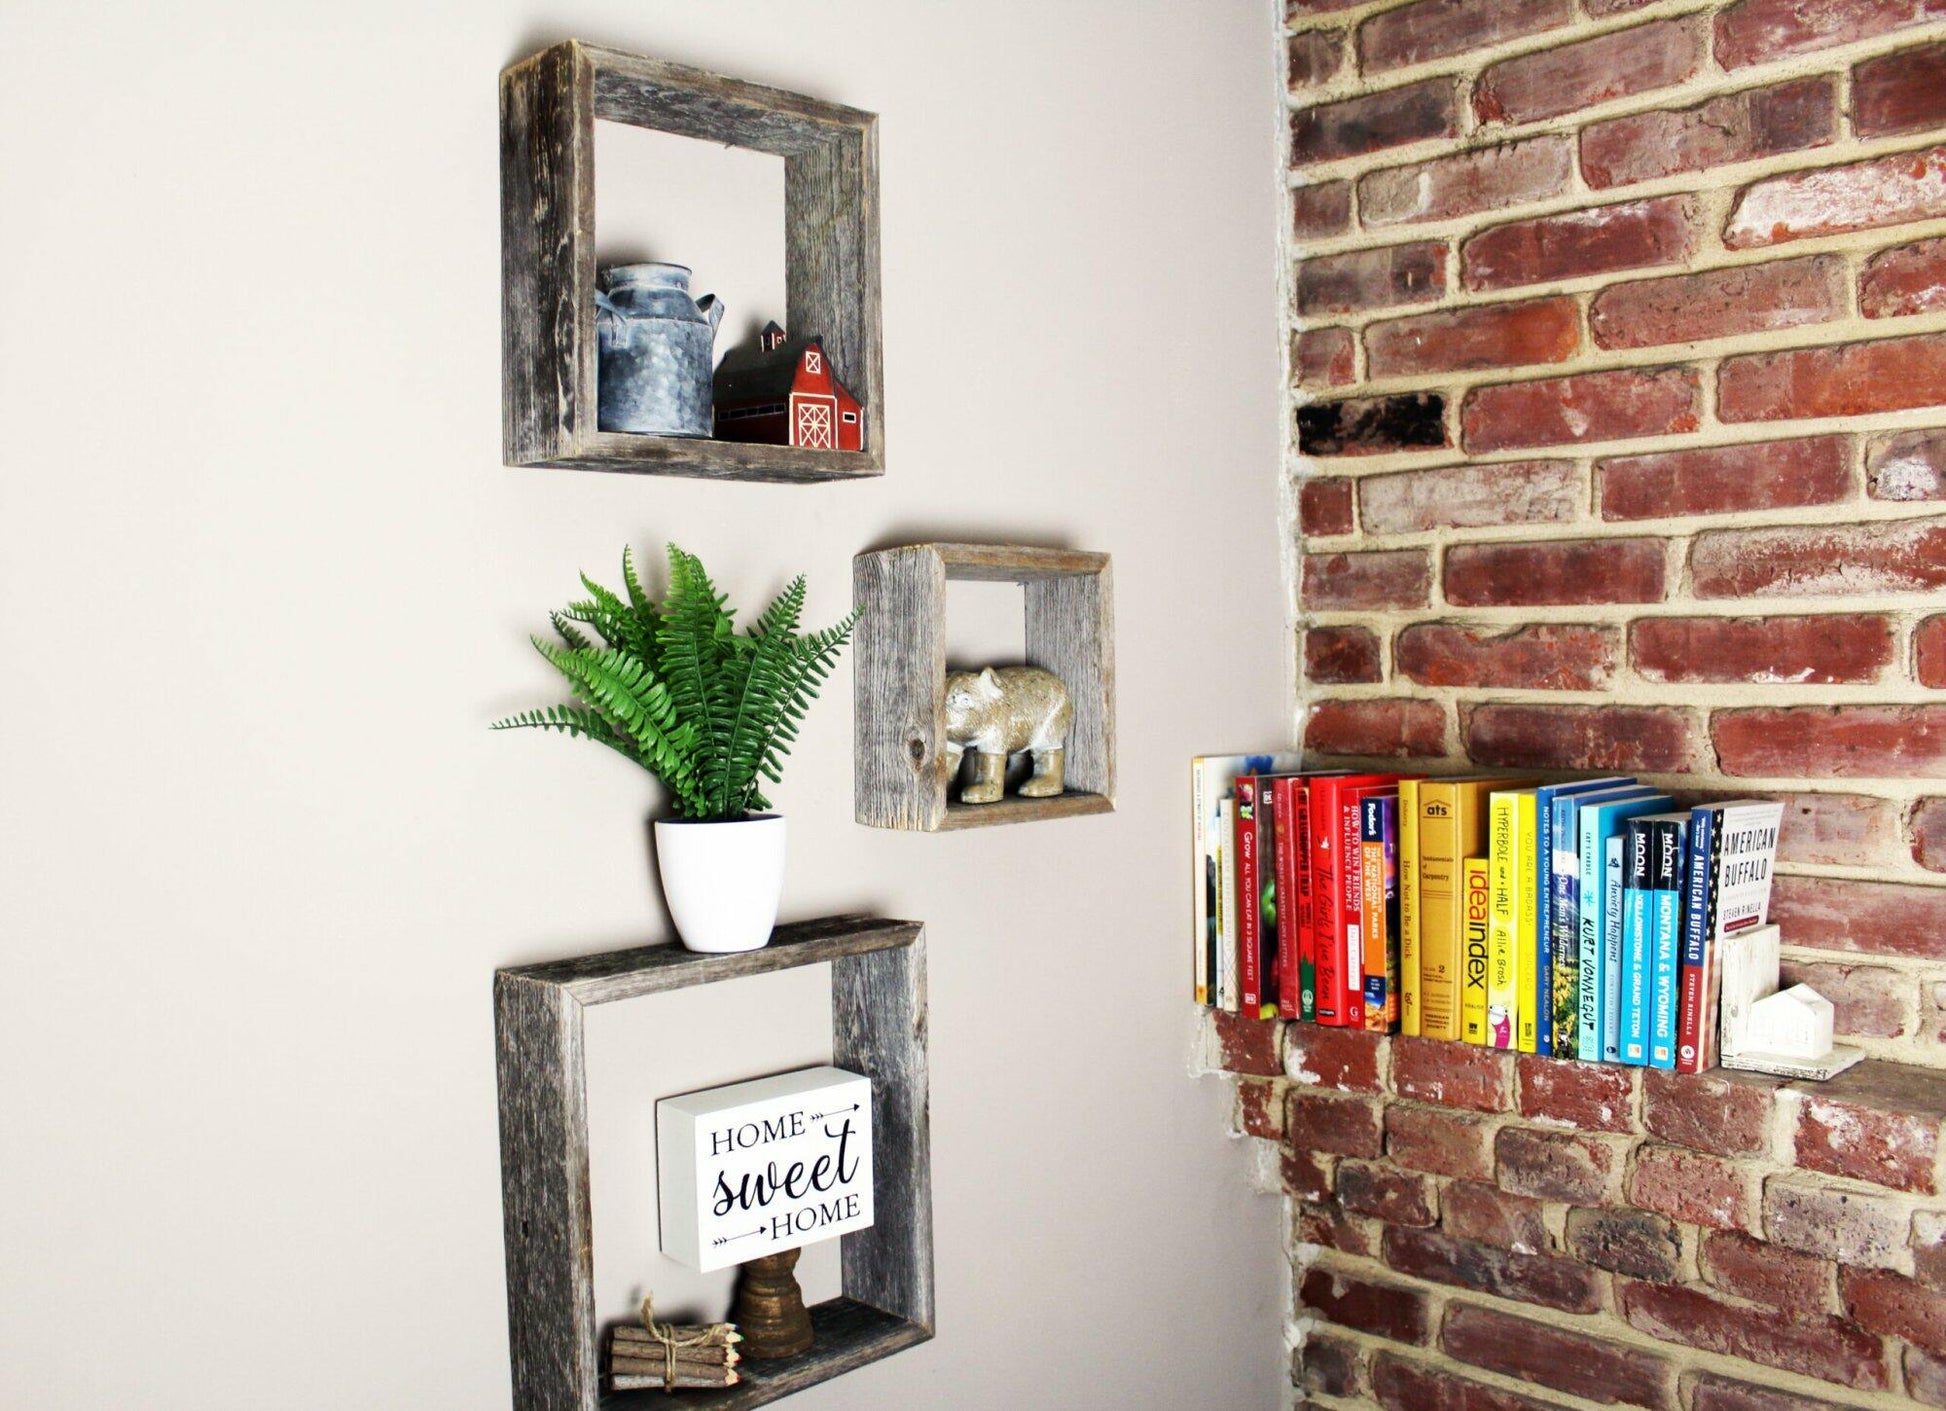 three open box floating shelves in small, medium, and large sizes. Open box shelves shown decorated on a wall next to a brick wall with books displayed.